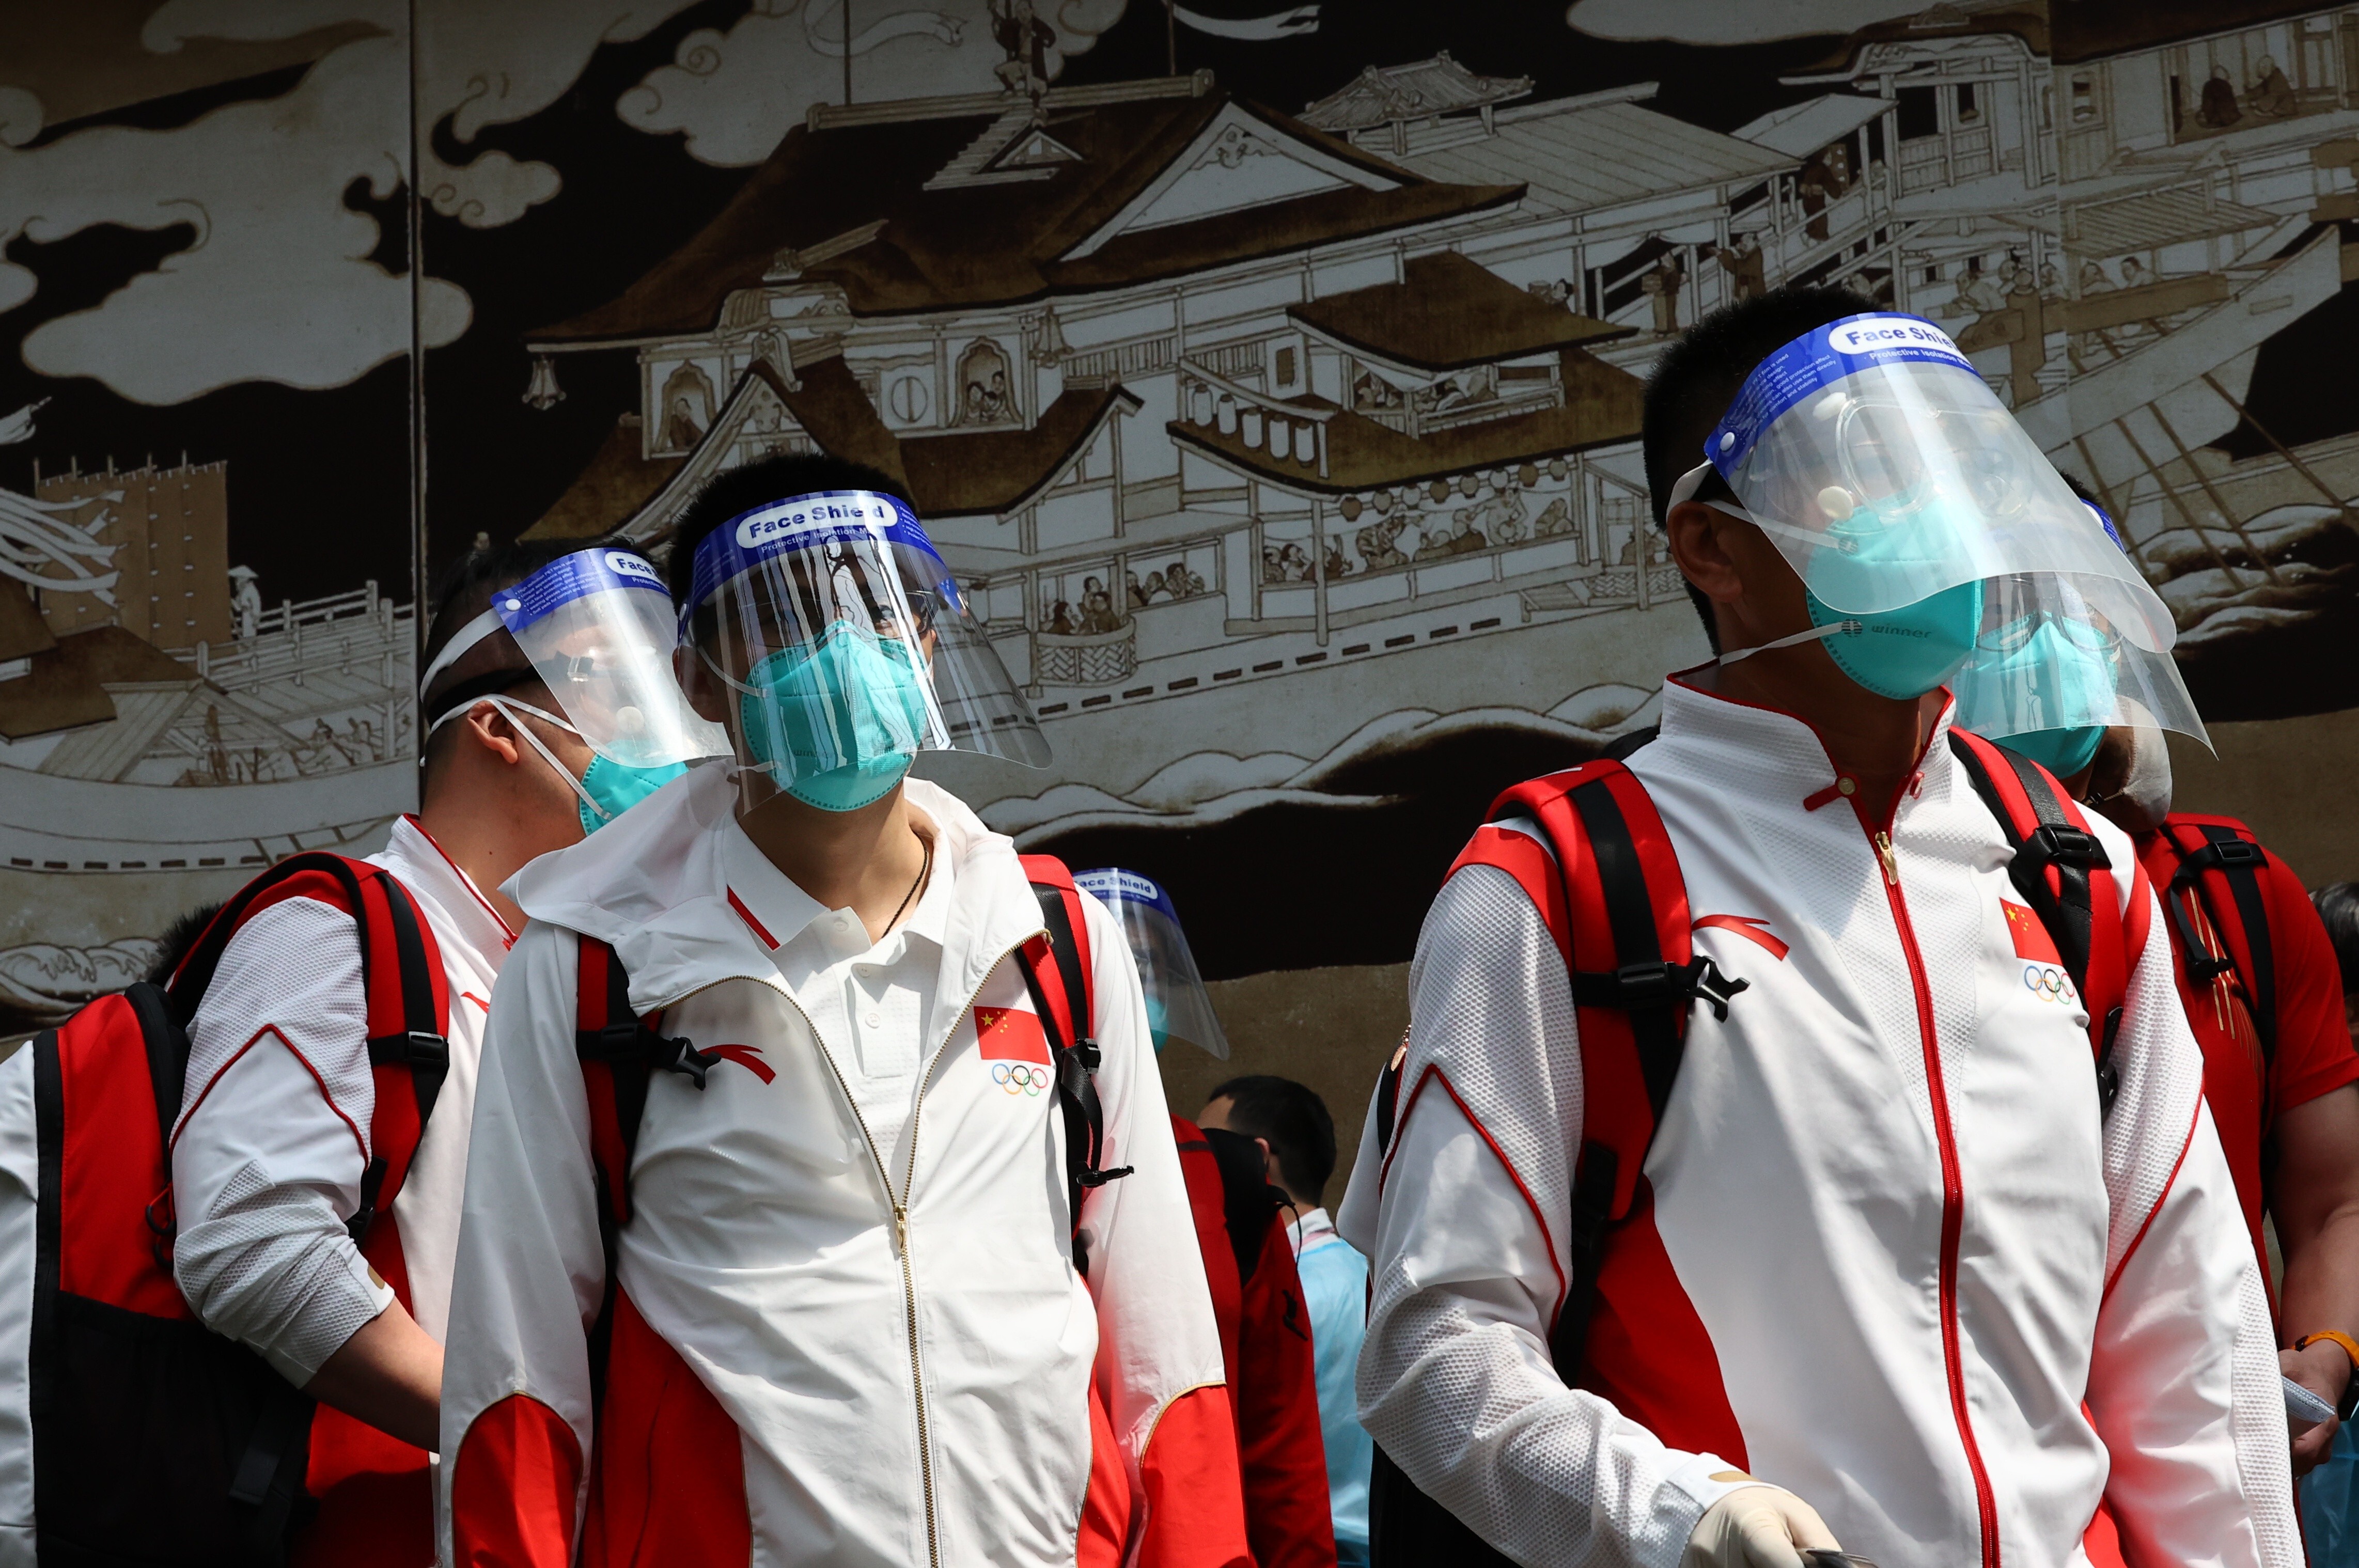 Members of the Chinese team wear protective masks and face shields as they arrive at Narita International Airport ahead of the Tokyo 2020 Olympic Games. Photo: Reuters